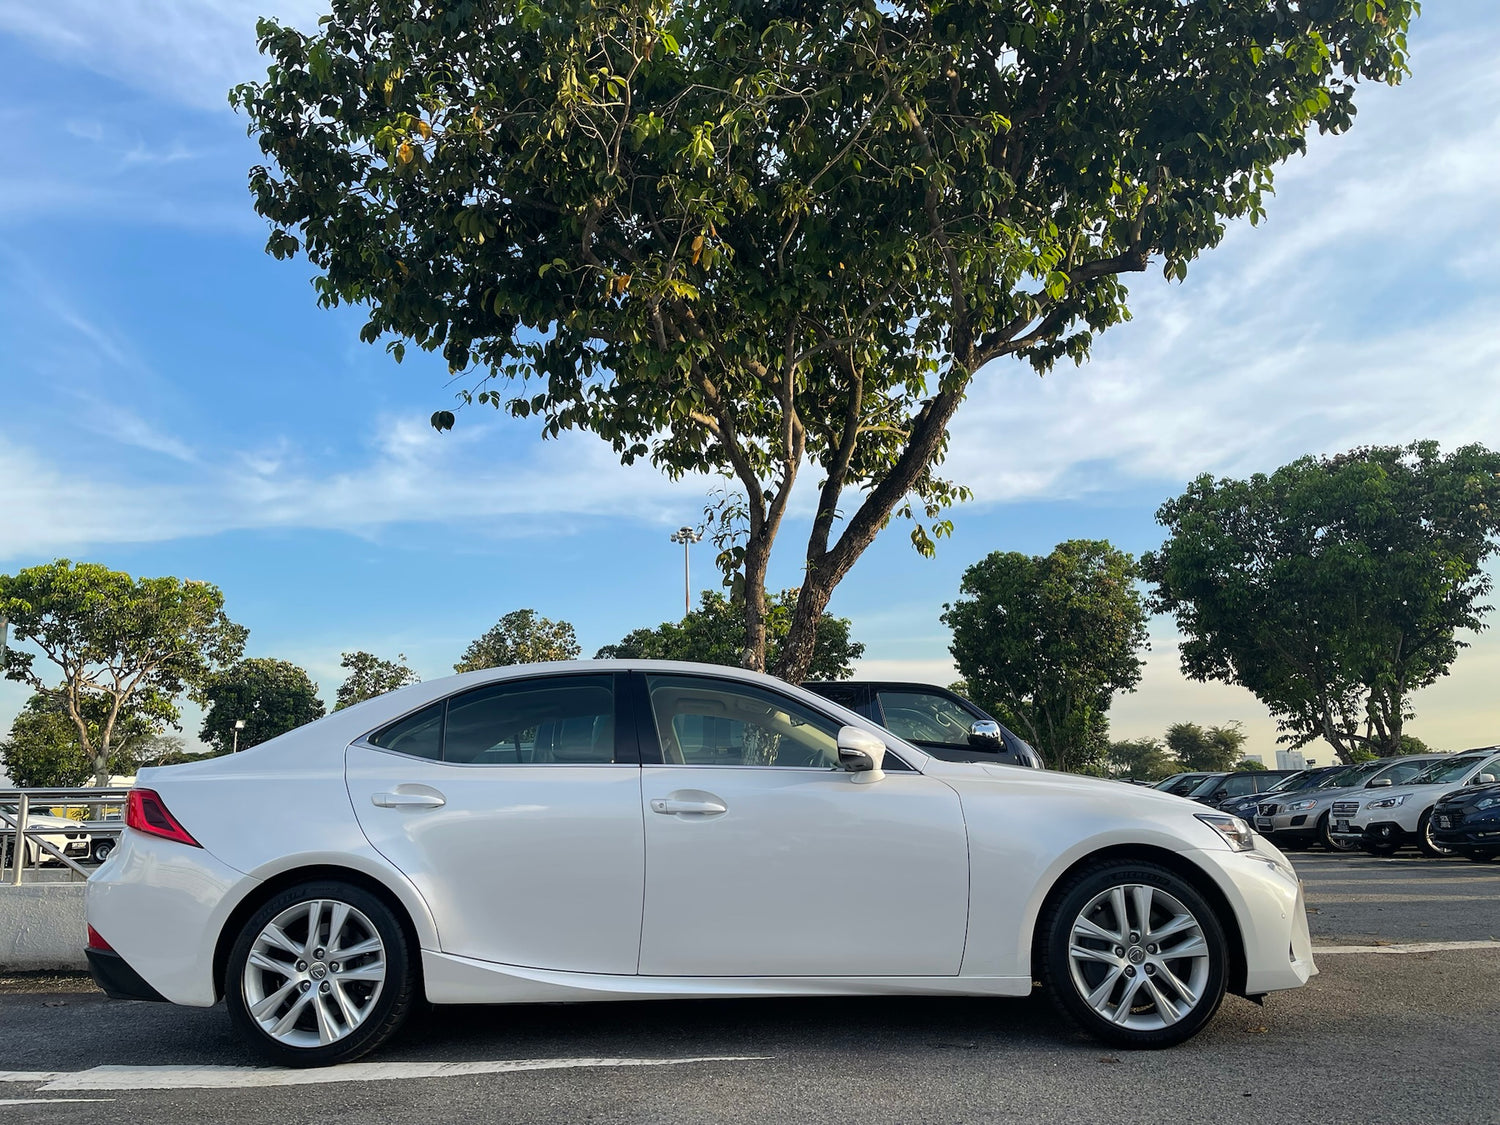 Toyota Lexus IS200T Executive 2.0A (COE end 2027)